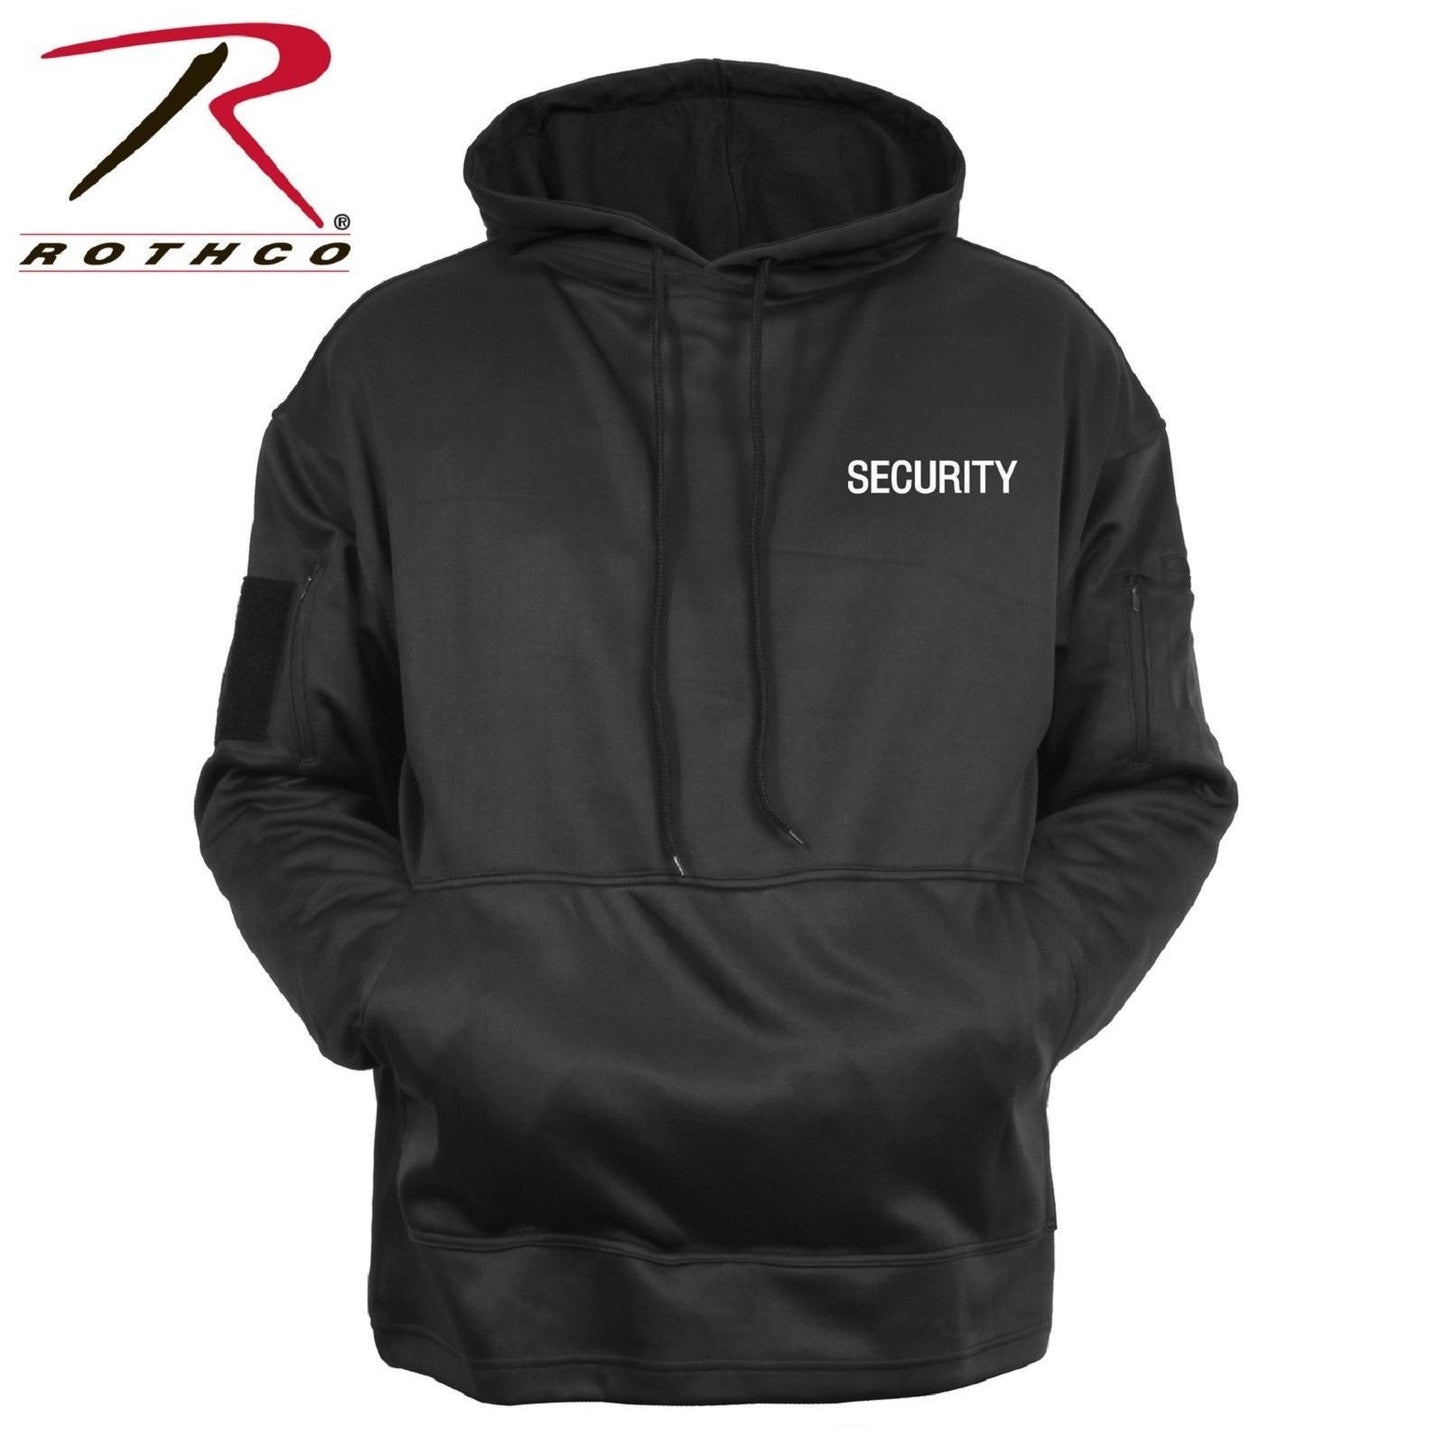 Black SECURITY Concealed Carry Hoodie Sweatshirt & USA Flag Patch Sweat Shirt